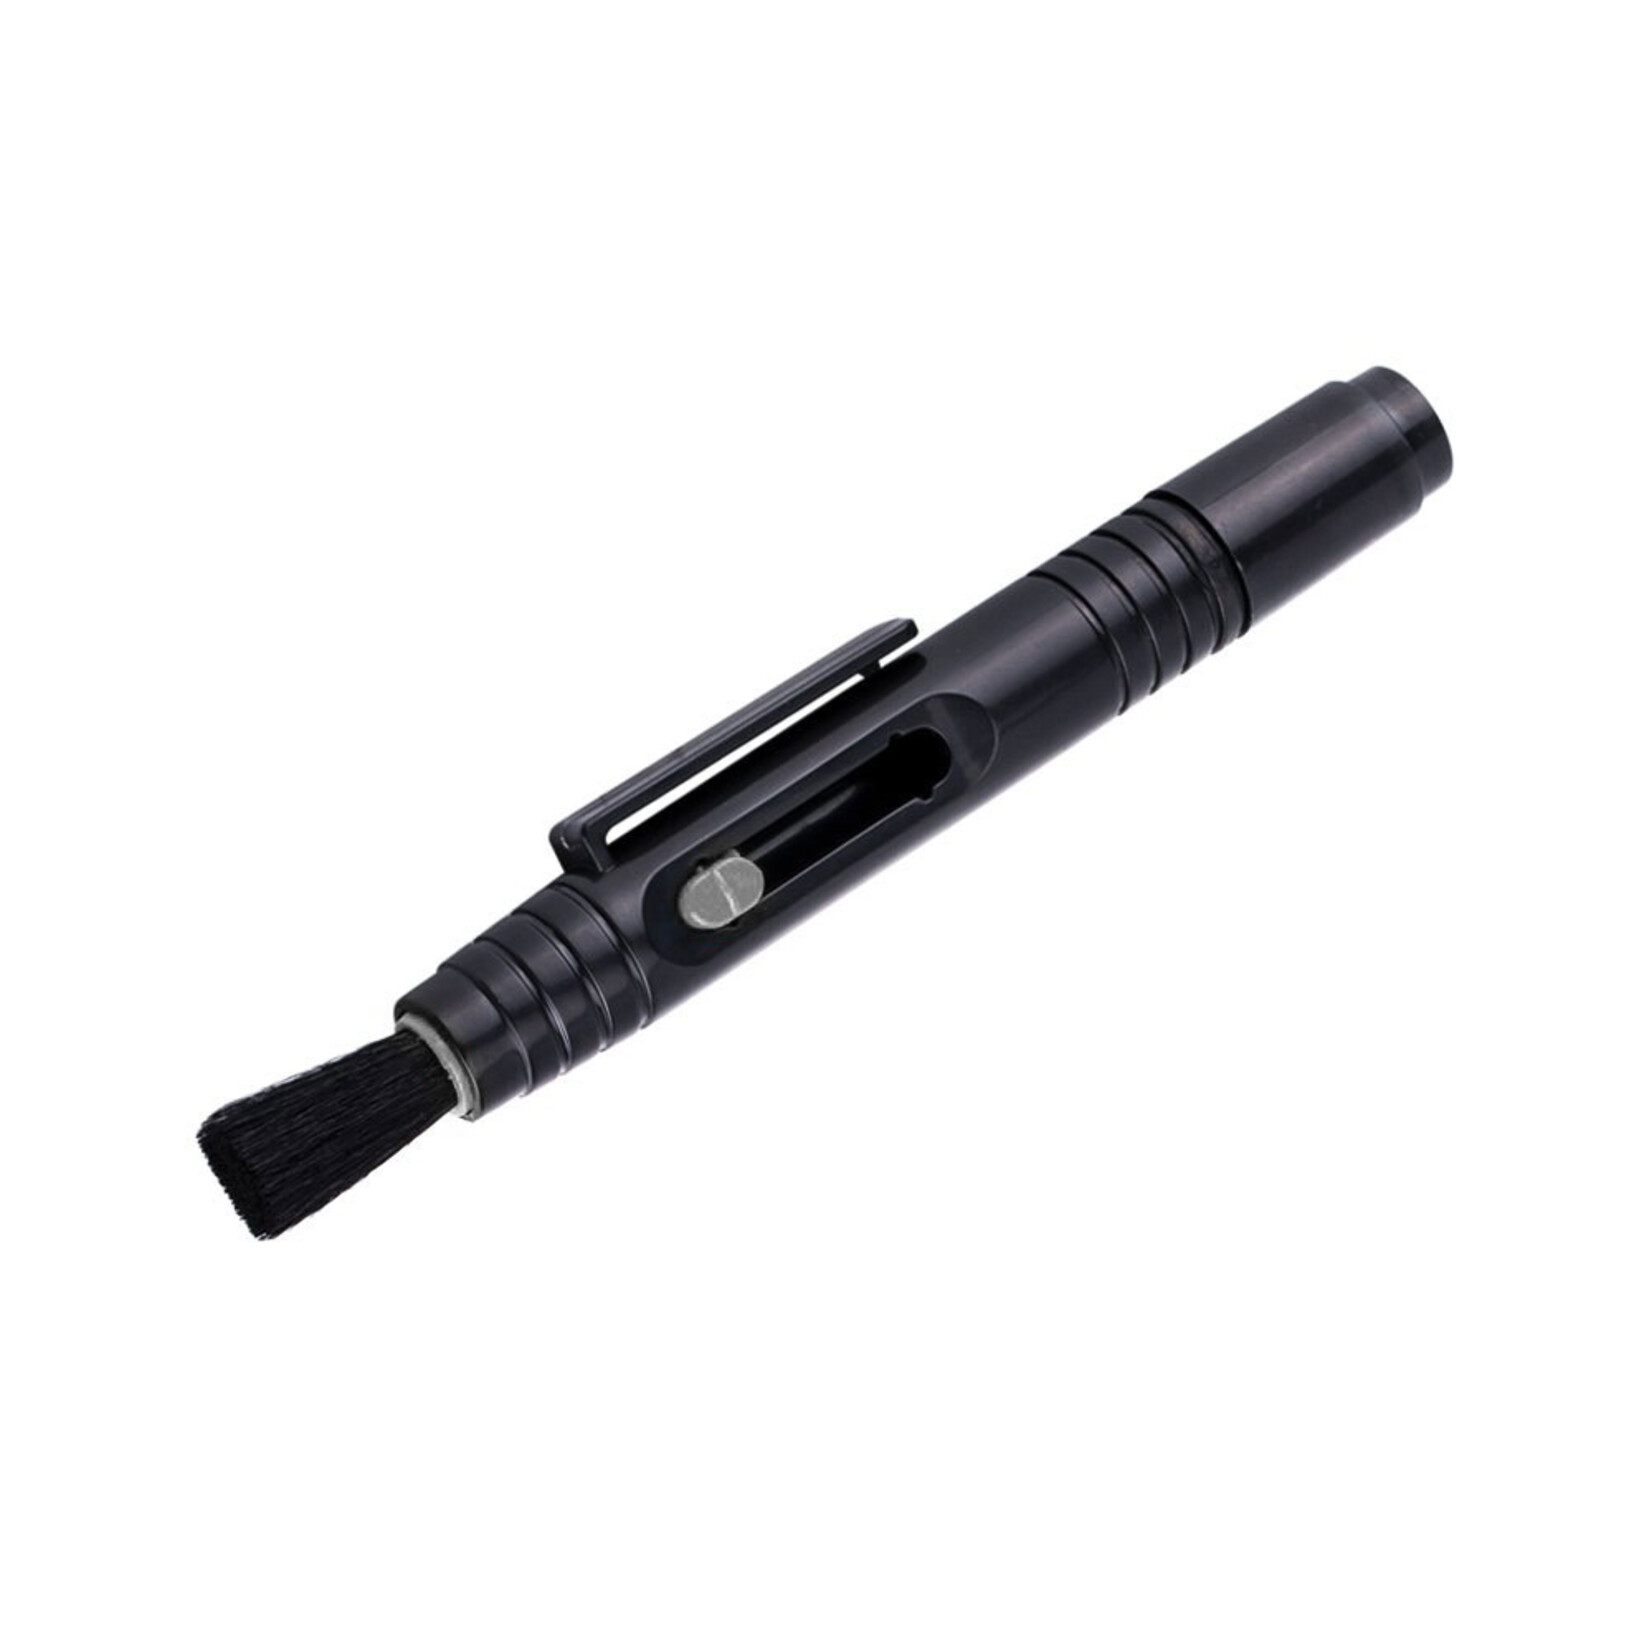 Promaster PRO Multifunction Lens Cleaning Pen